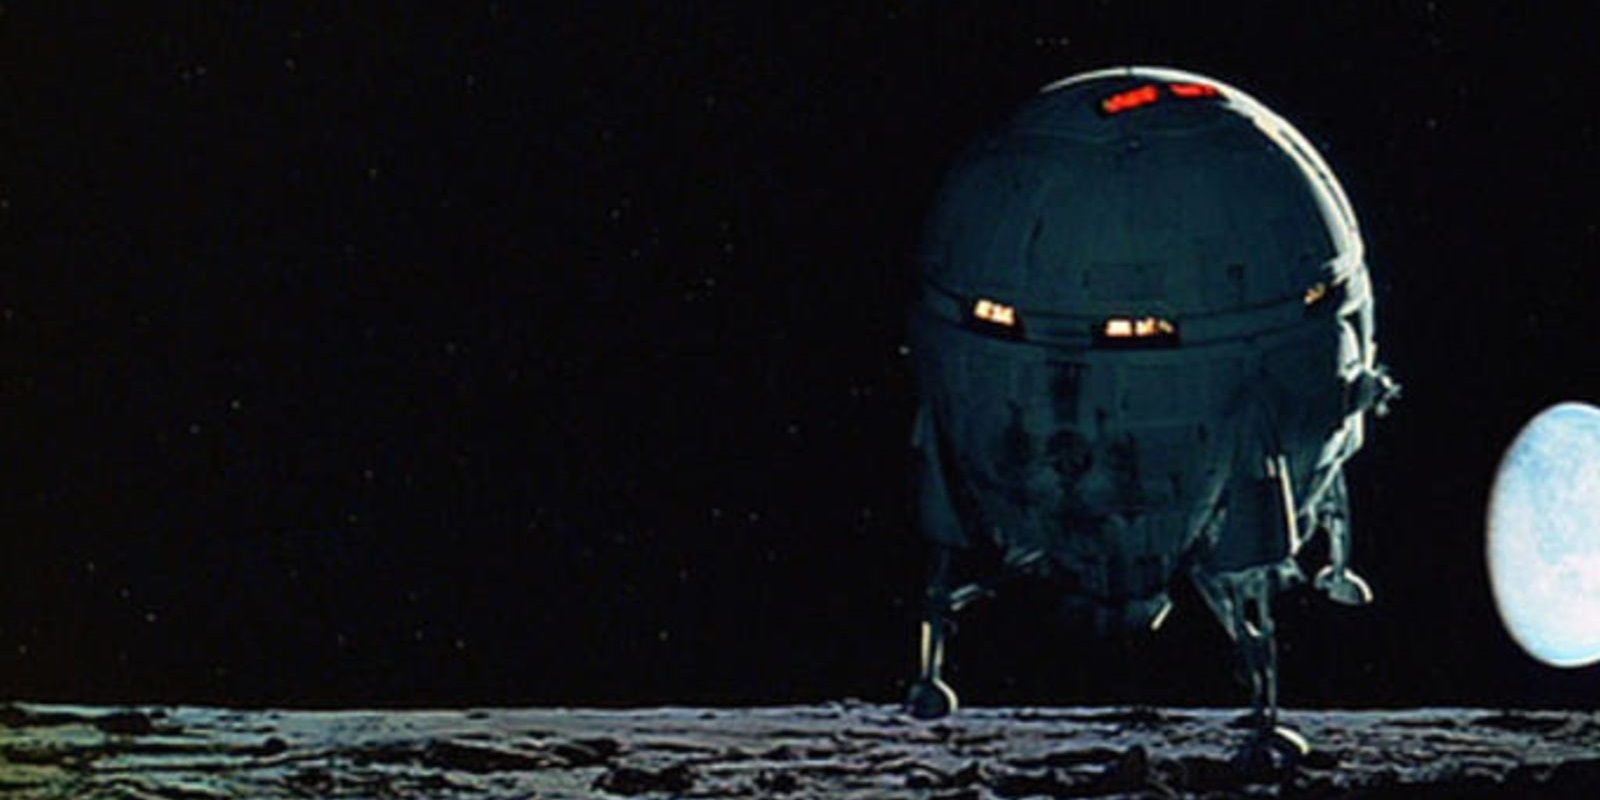 2001: A Space Odyssey: 10 Pieces Of Sci-Fi Tech From The Movie We Have Today